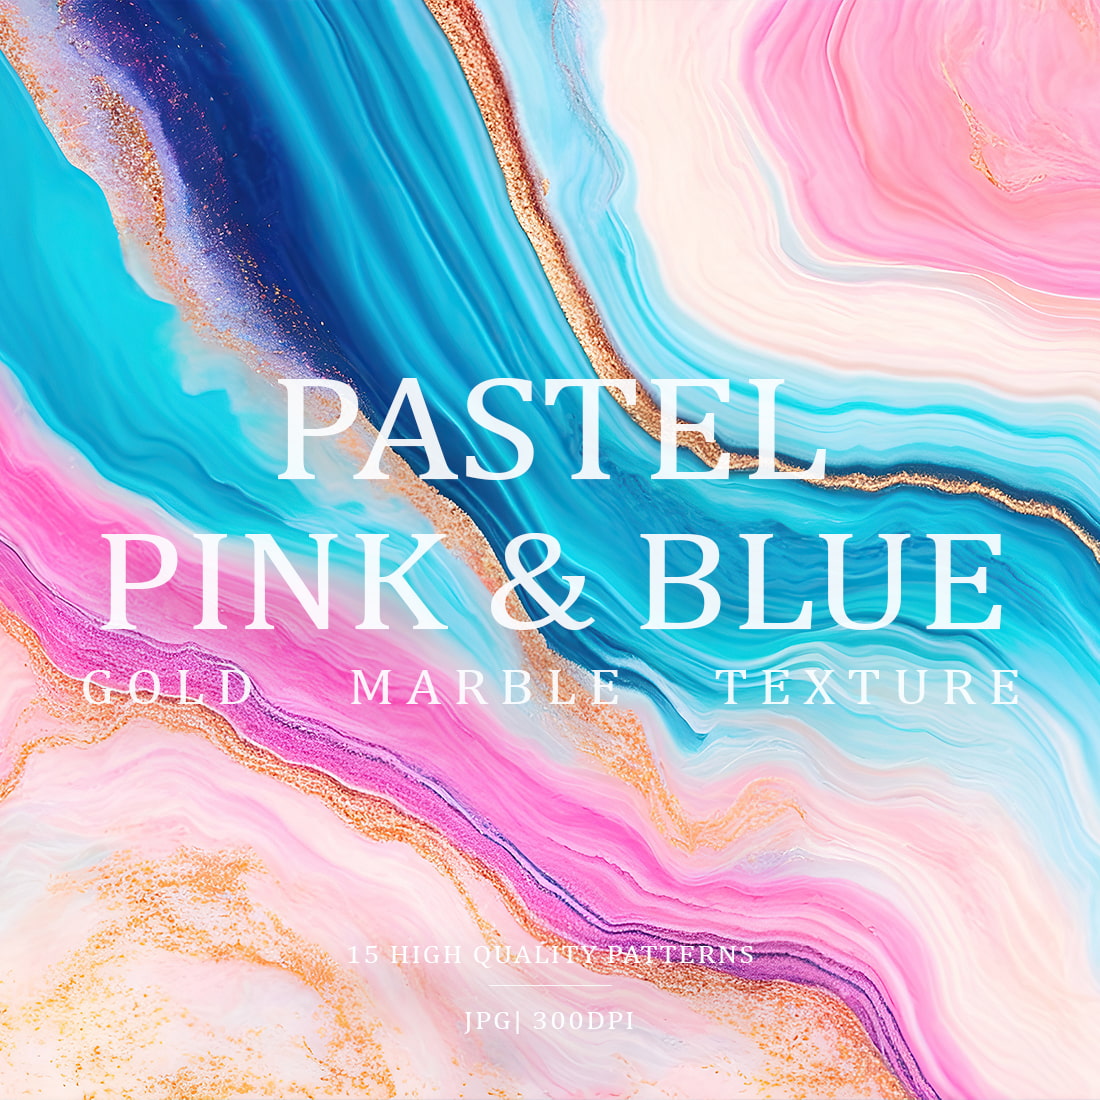 Pastel Pink & Blue Marble Textures cover image.